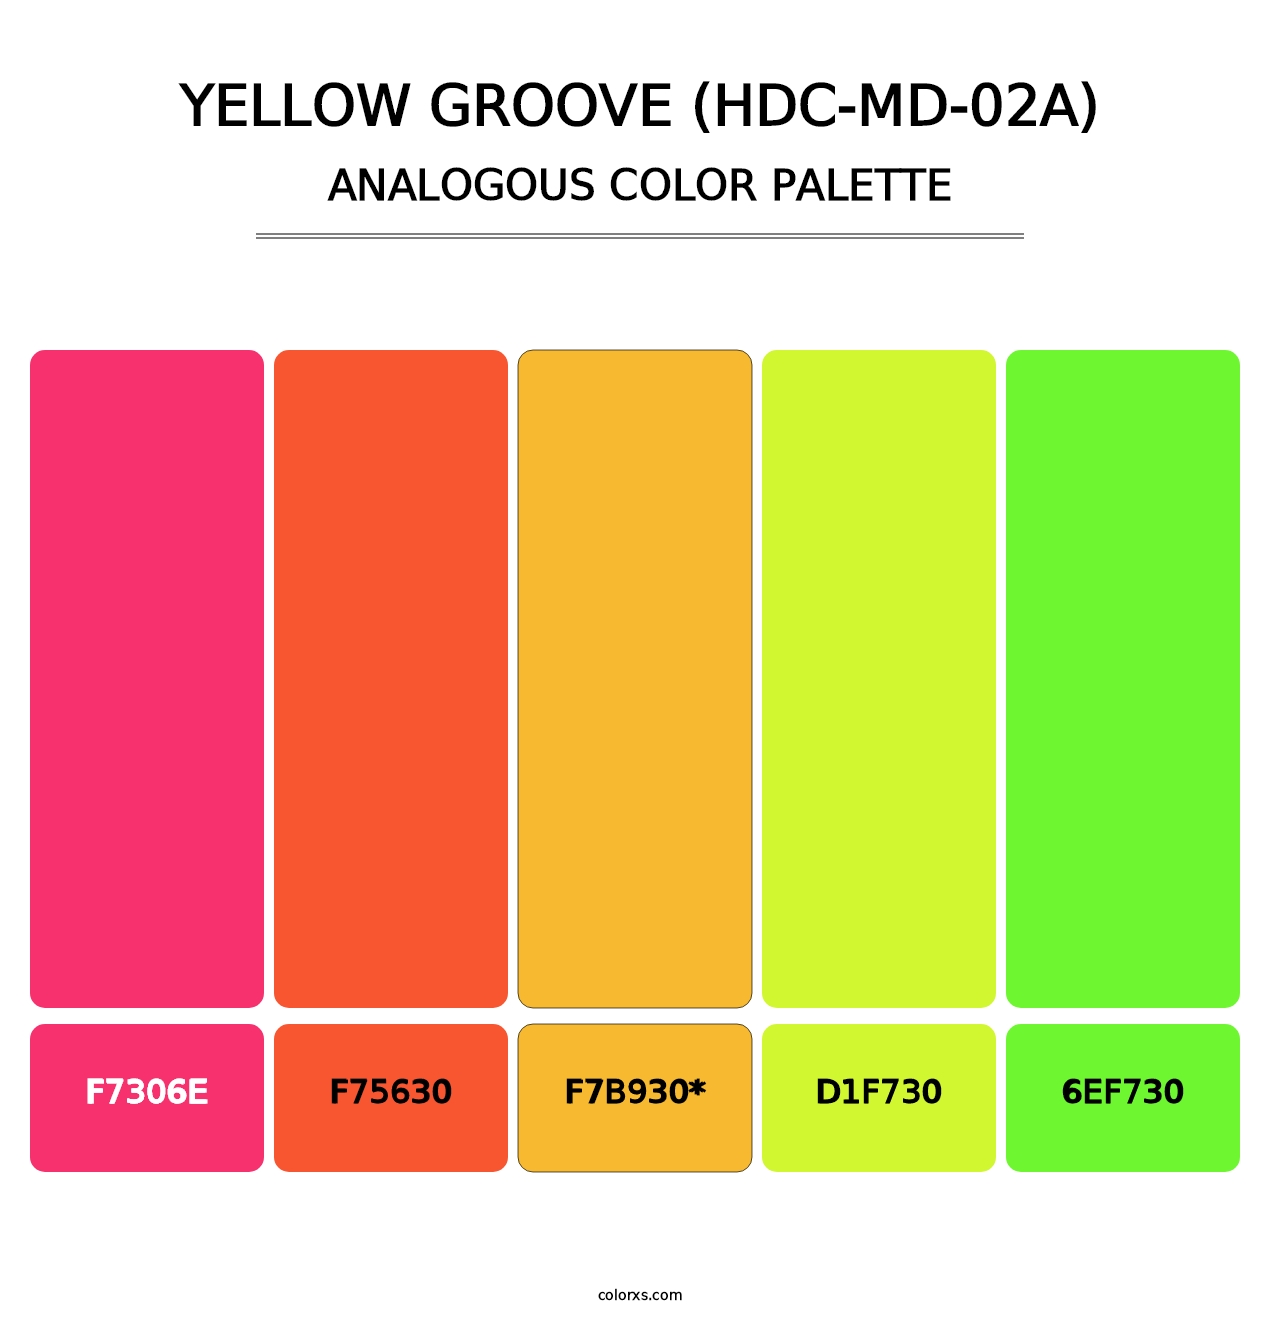 Yellow Groove (HDC-MD-02A) - Analogous Color Palette